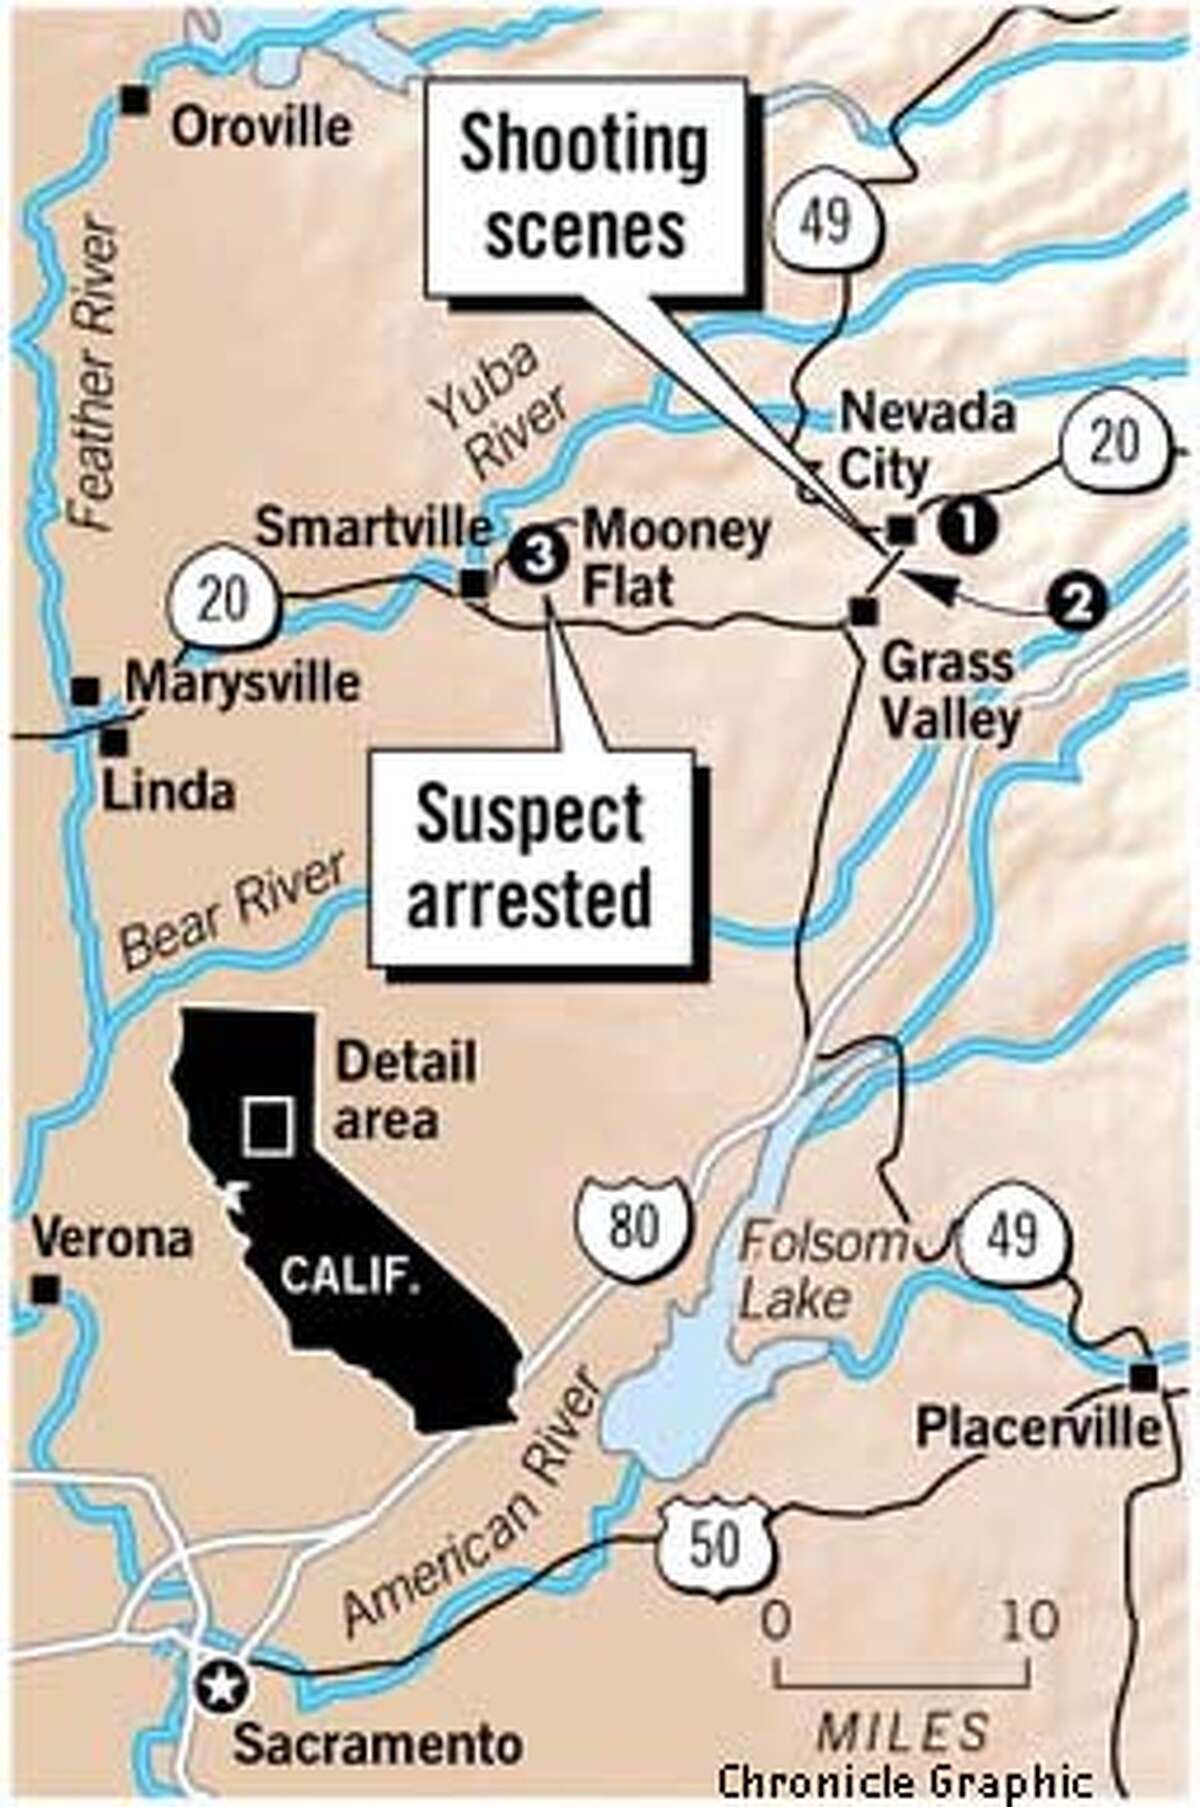 Violent Trail. 1) 11:28 a.m.: A 911 call reports shots fired at the county Mental Health Department in Nevada City. Officers find three people shot, two fatally, in the lobby. 2) 11:37 a.m.: Another 911 call reports that a gunman has shot two people, killing one, at a Lyon's restaurant on the Nevada City Highway. 3) 8:56 p.m.: Nevada County sheriff's deputies capture a suspect in the shootings at a home near Smartville after a standoff. Chronicle Graphic